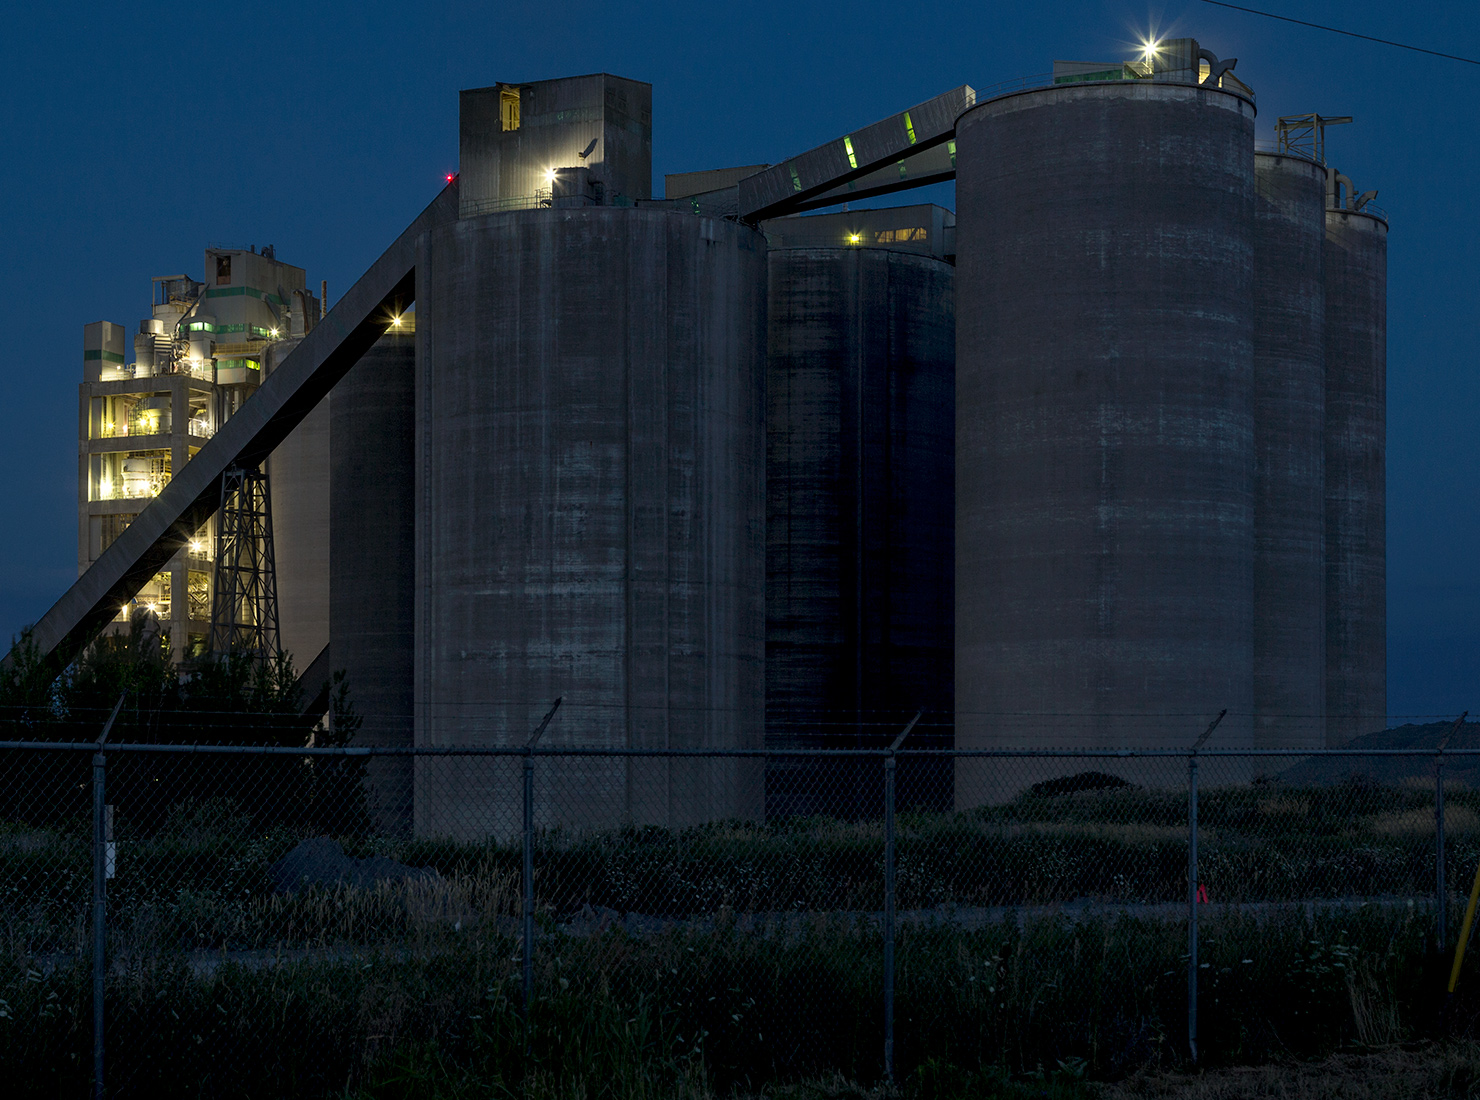 20160724. The silos of St. Marys Cement at dusk.